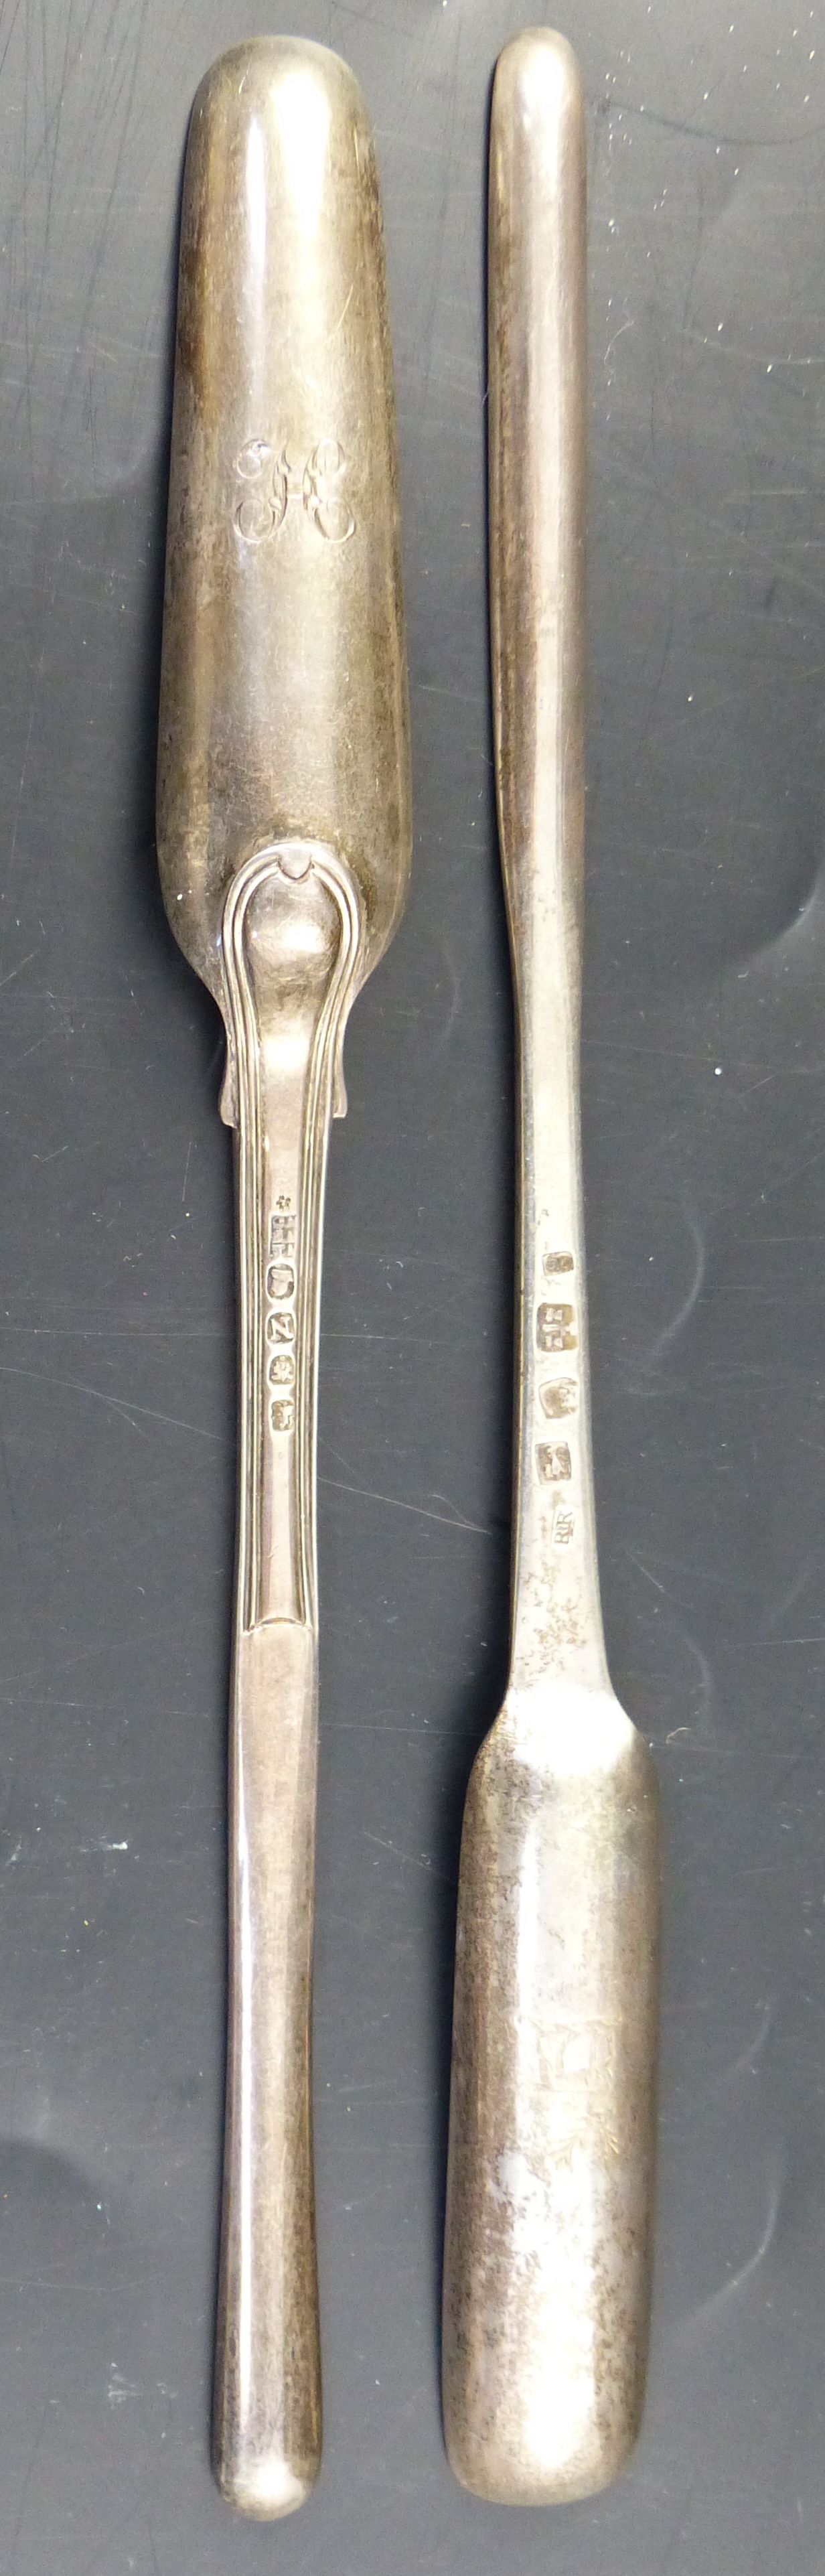 Two 19th century silver marrow scoops, thread pattern by Eley, Fearn & Chawner, London, 1808 and